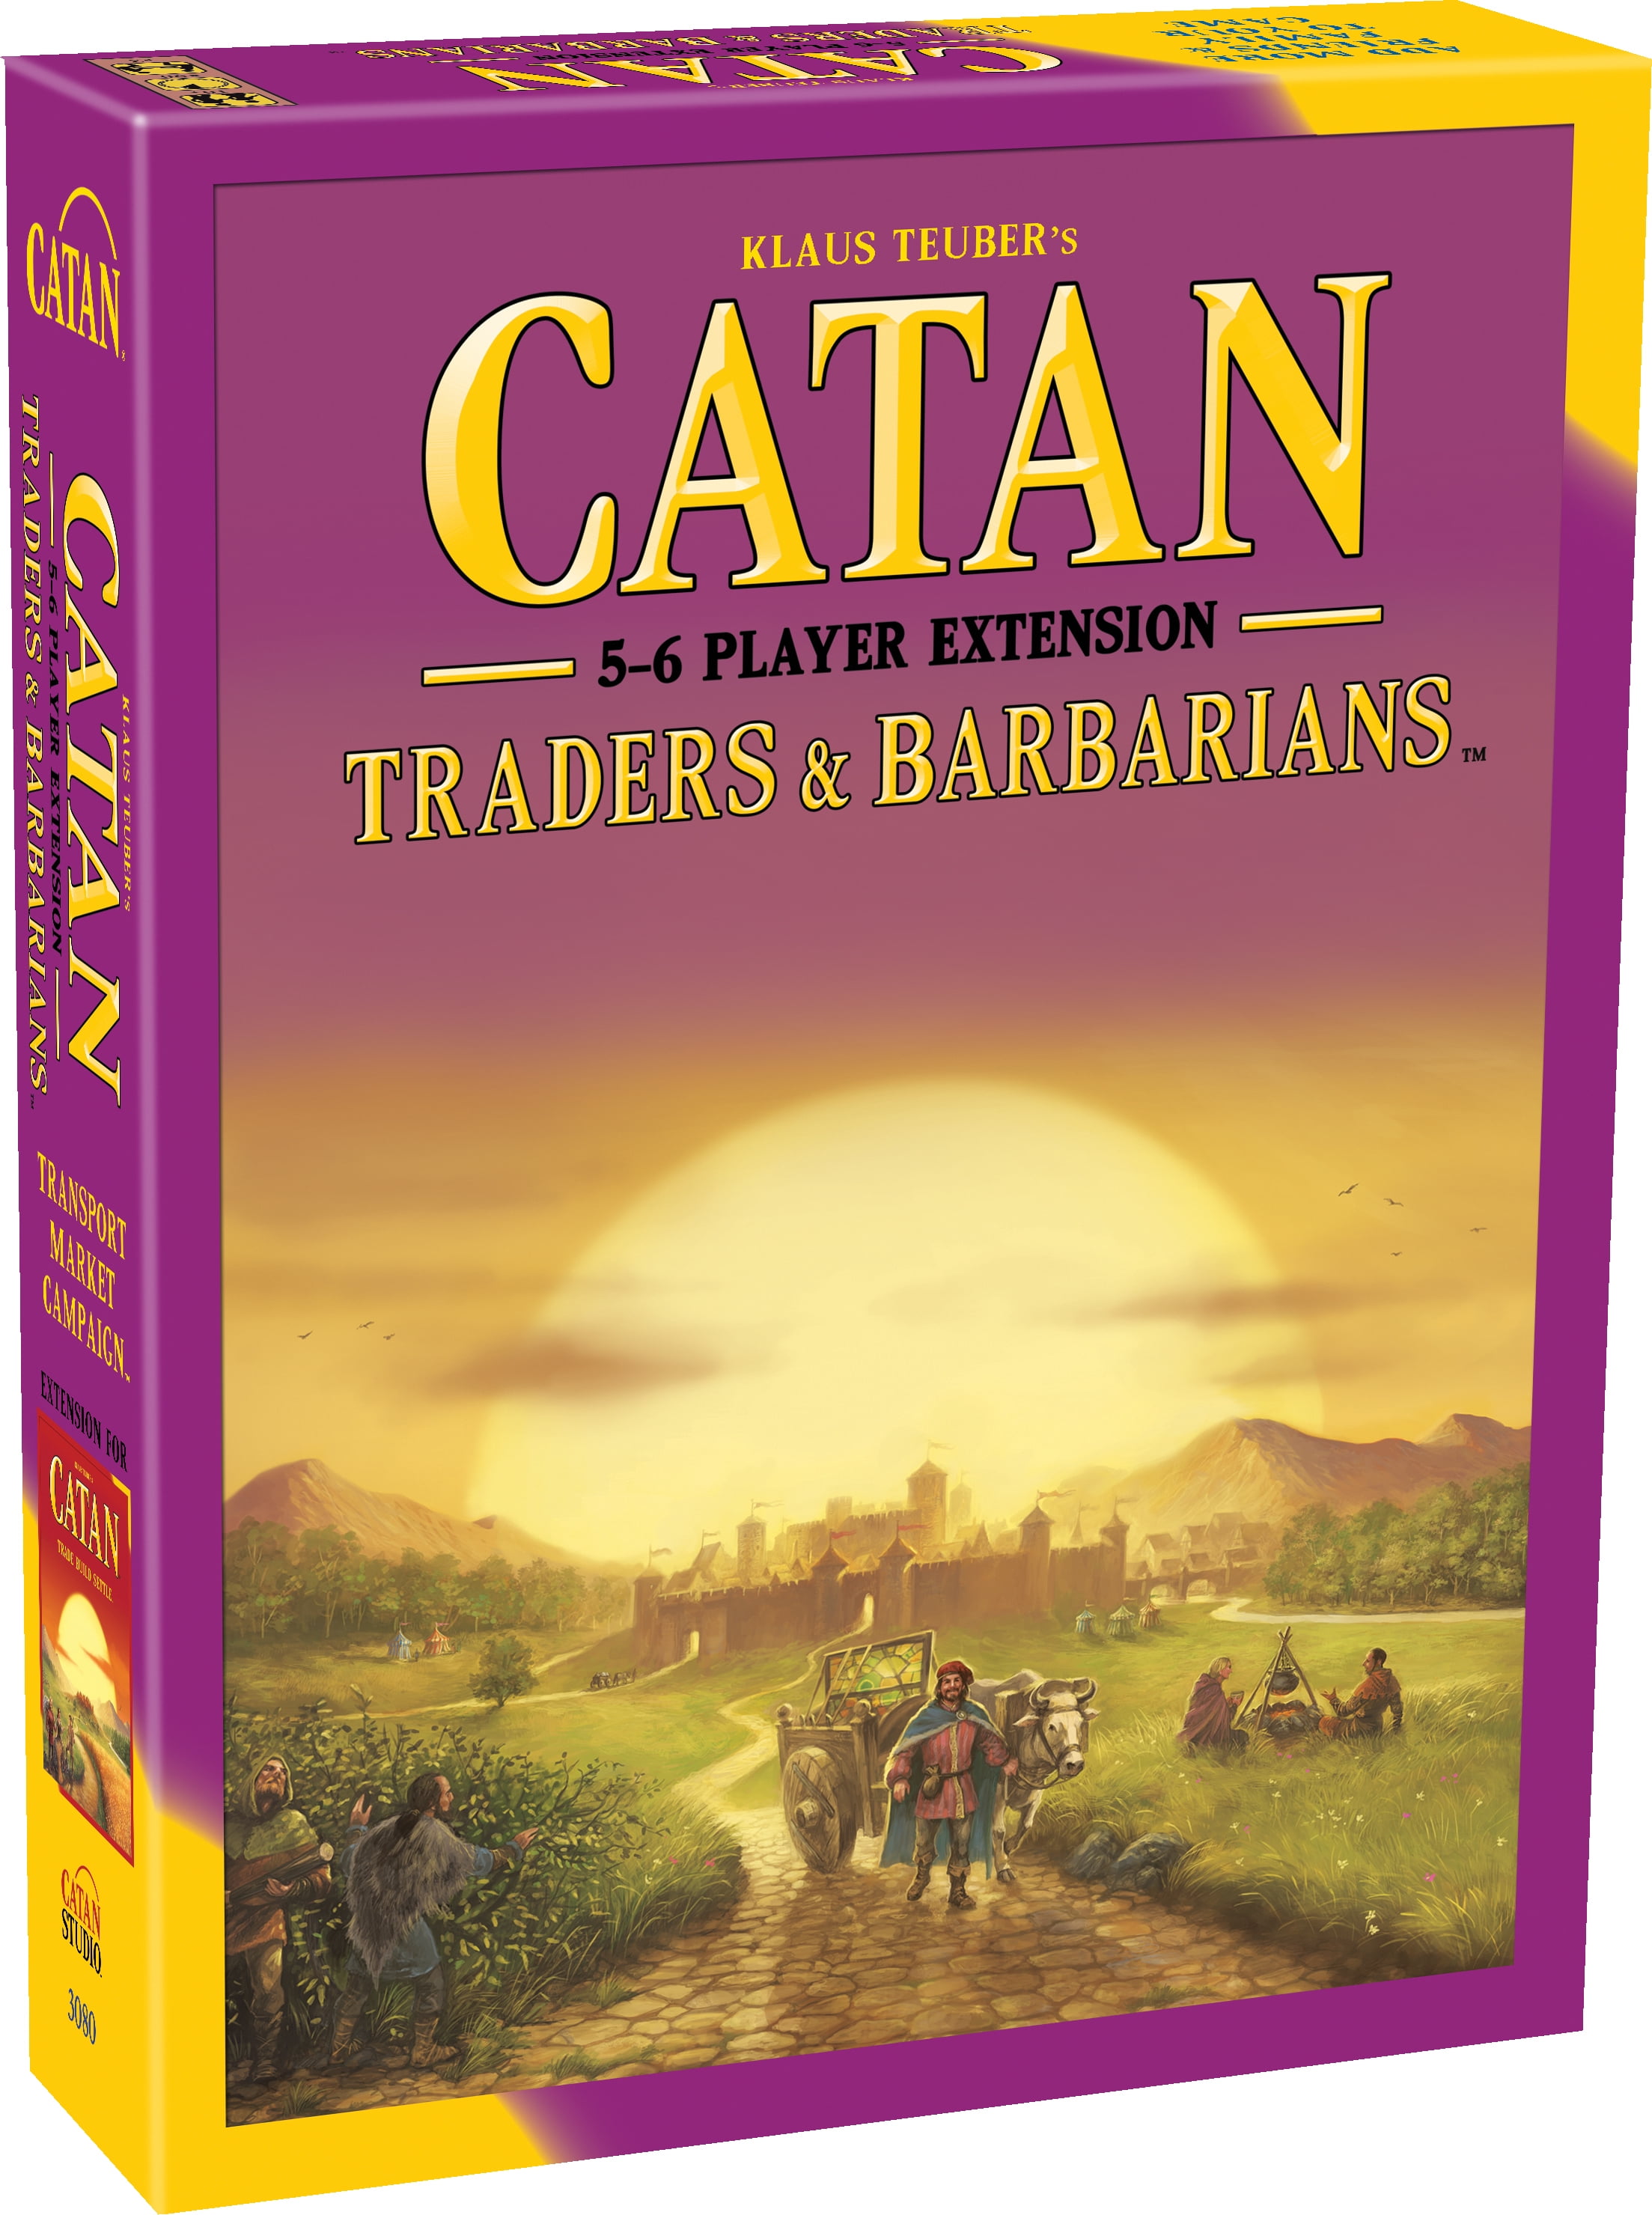 Catan 5-6 Player ExtensionGrain Resource Cards x5Replacement Game Pieces 